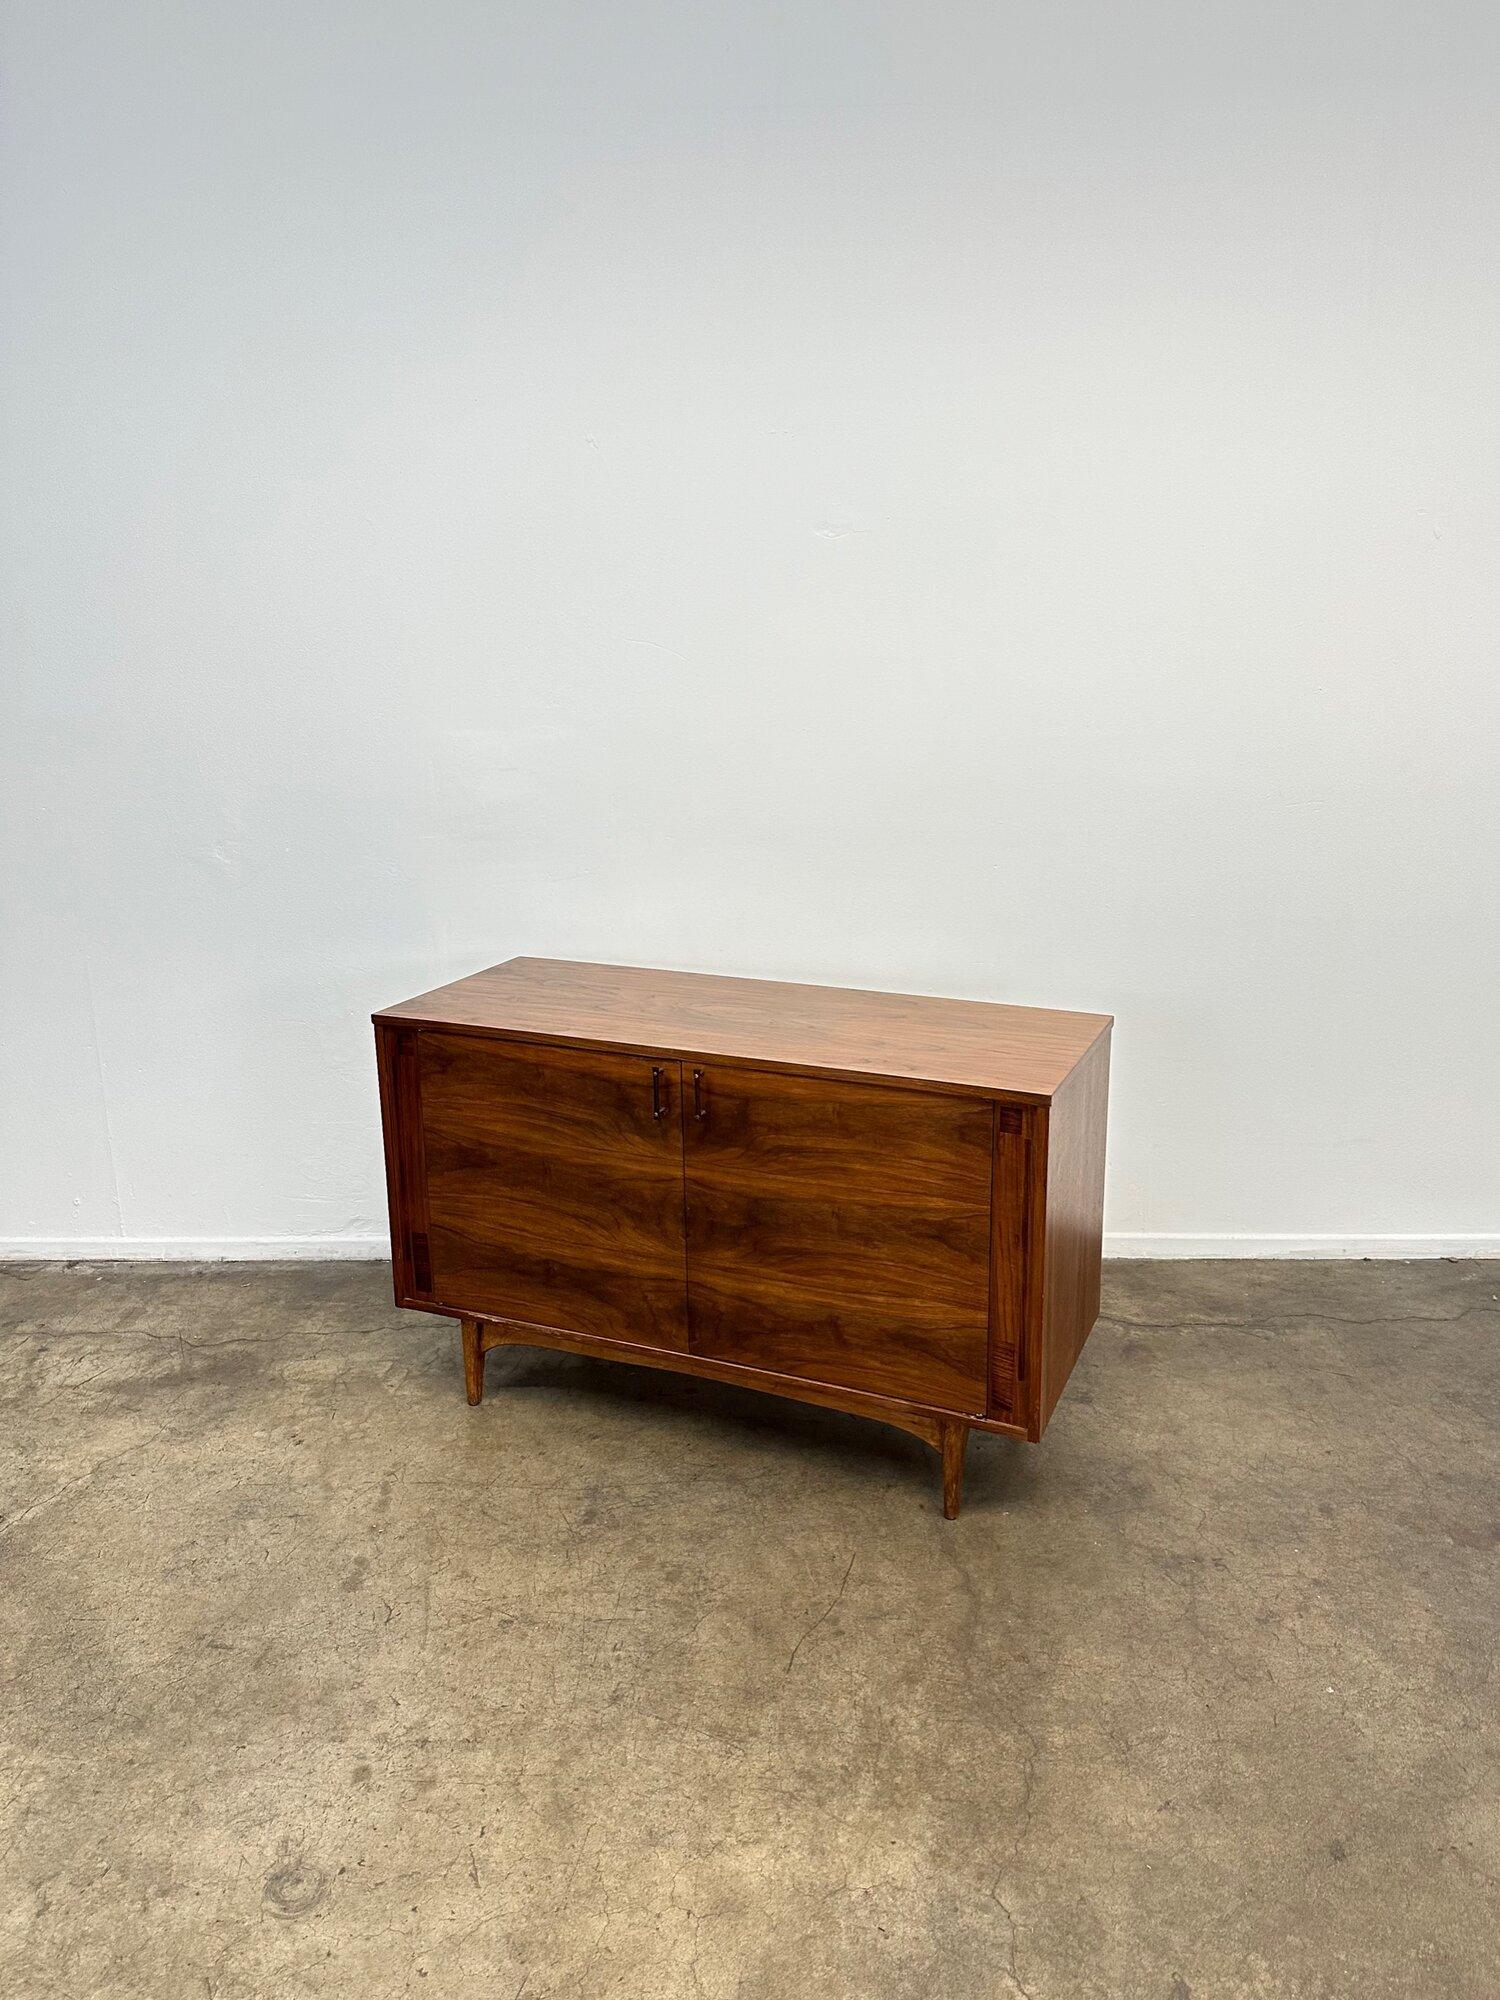 Fully restored credenza made in walnut wood featuring rosewood handles with brass, two smooth sliding drawers with makers mark inside, contrasting veneer details, half shelf inside and all on tapered legs.
 